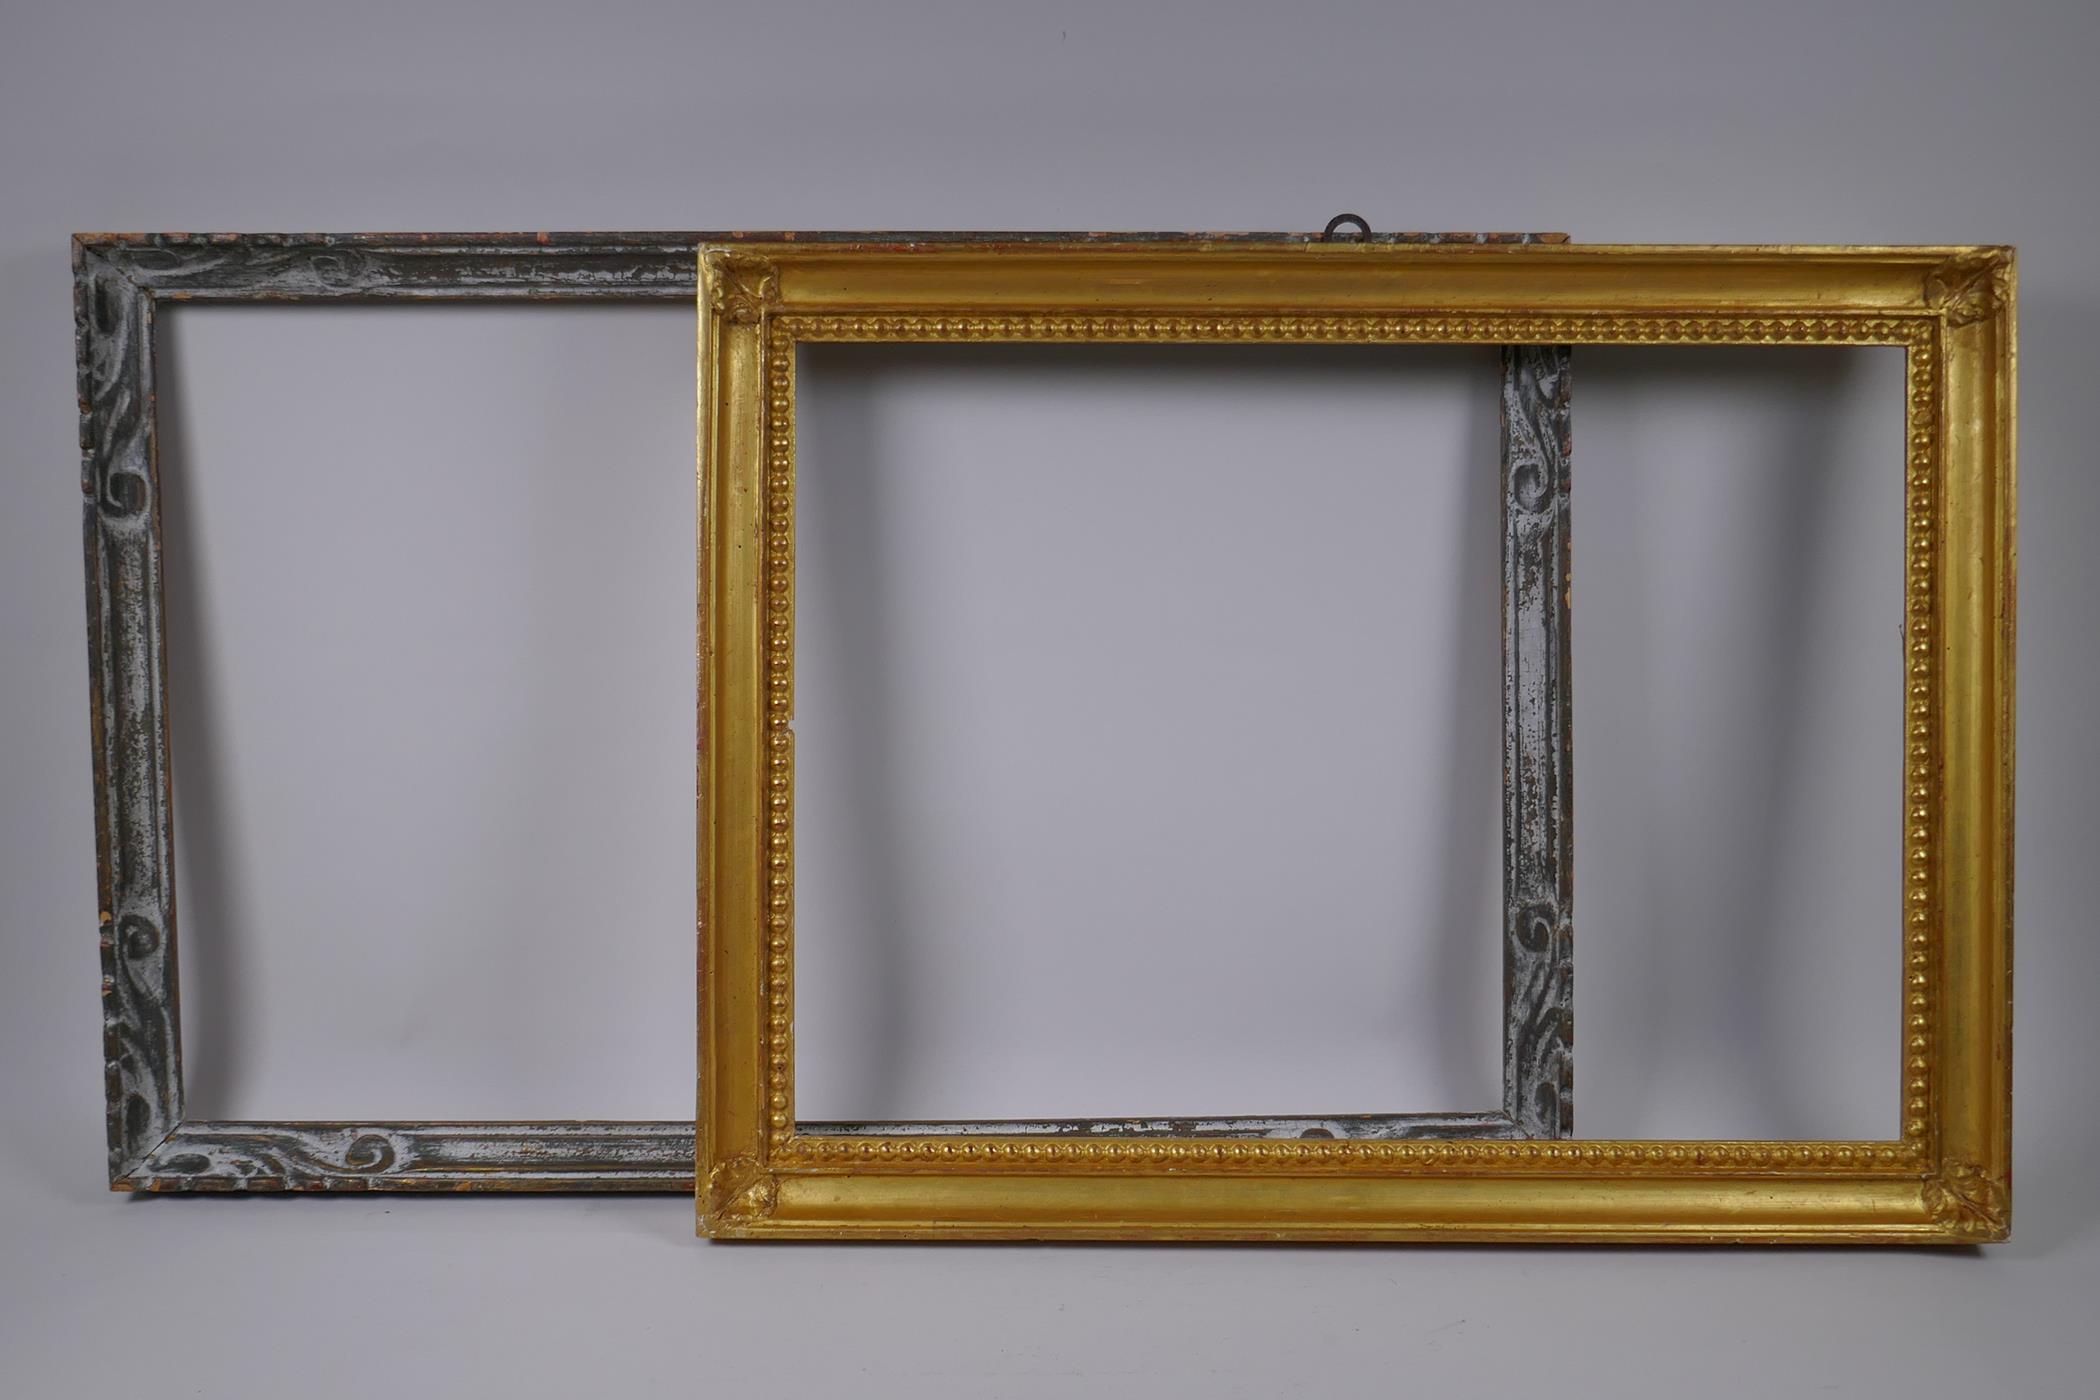 A giltwood picture frame, with bead and corner leaf decoration, and an early C20th carved wood